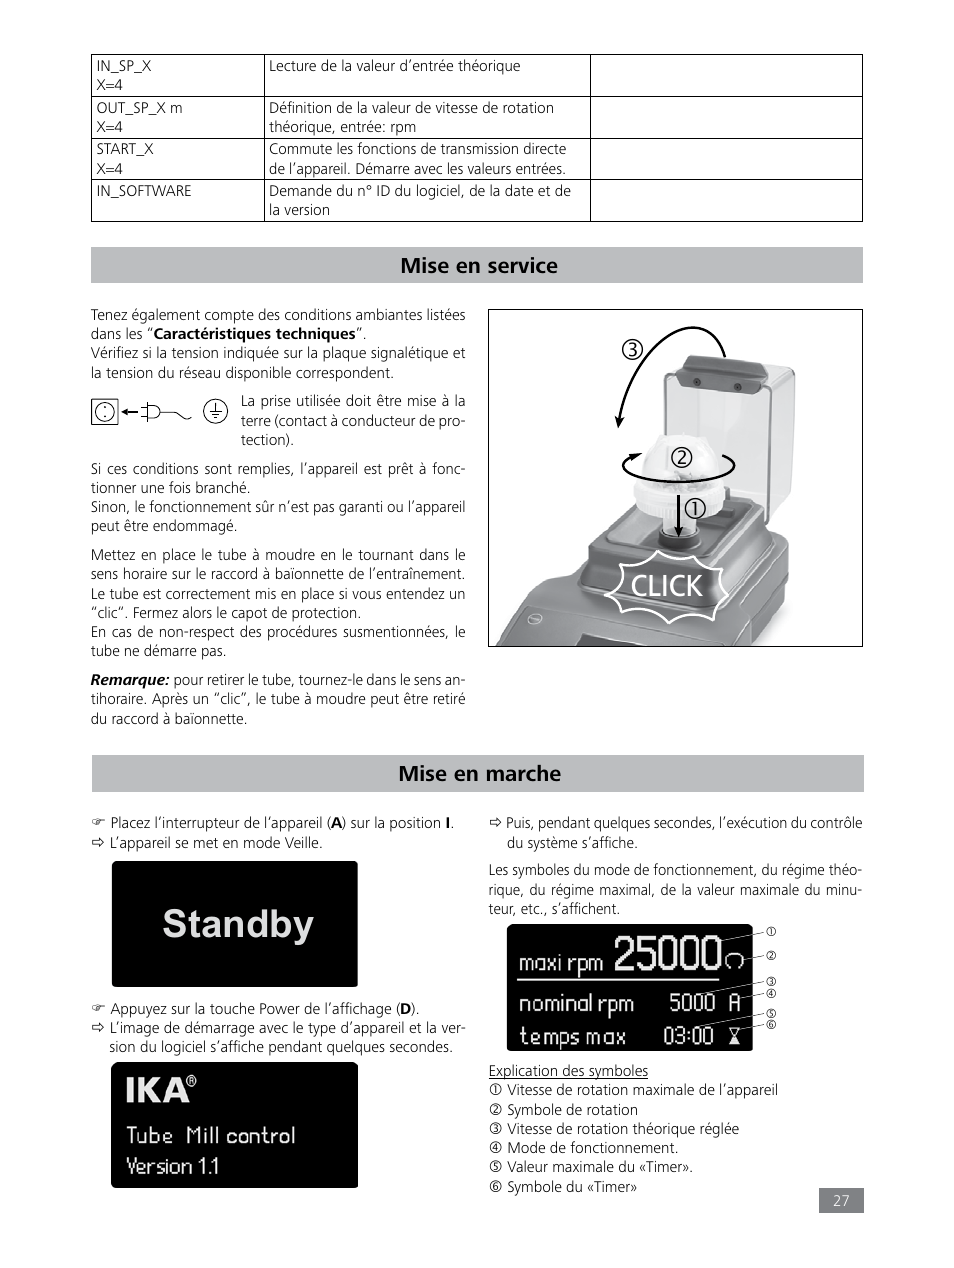 Standby, Click, Mise en service | Mise en marche | IKA Tube Mill control User Manual | Page 27 / 64